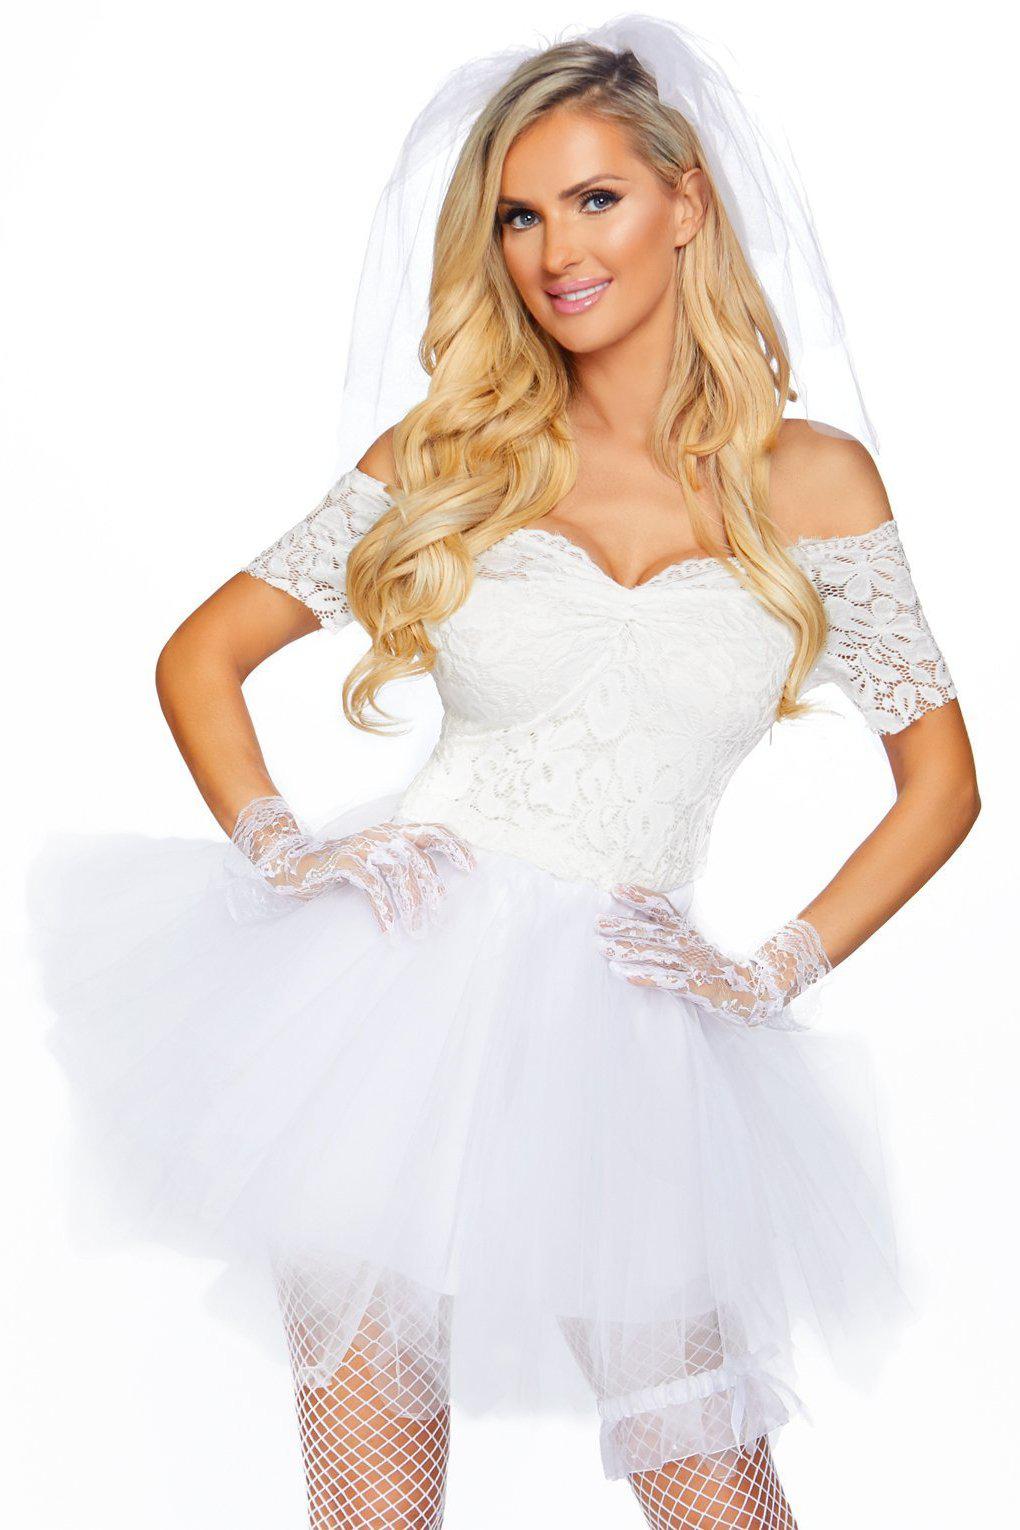 Blushing Bride Costume-Other Costumes-Leg Avenue-White-S/M-SEXYSHOES.COM